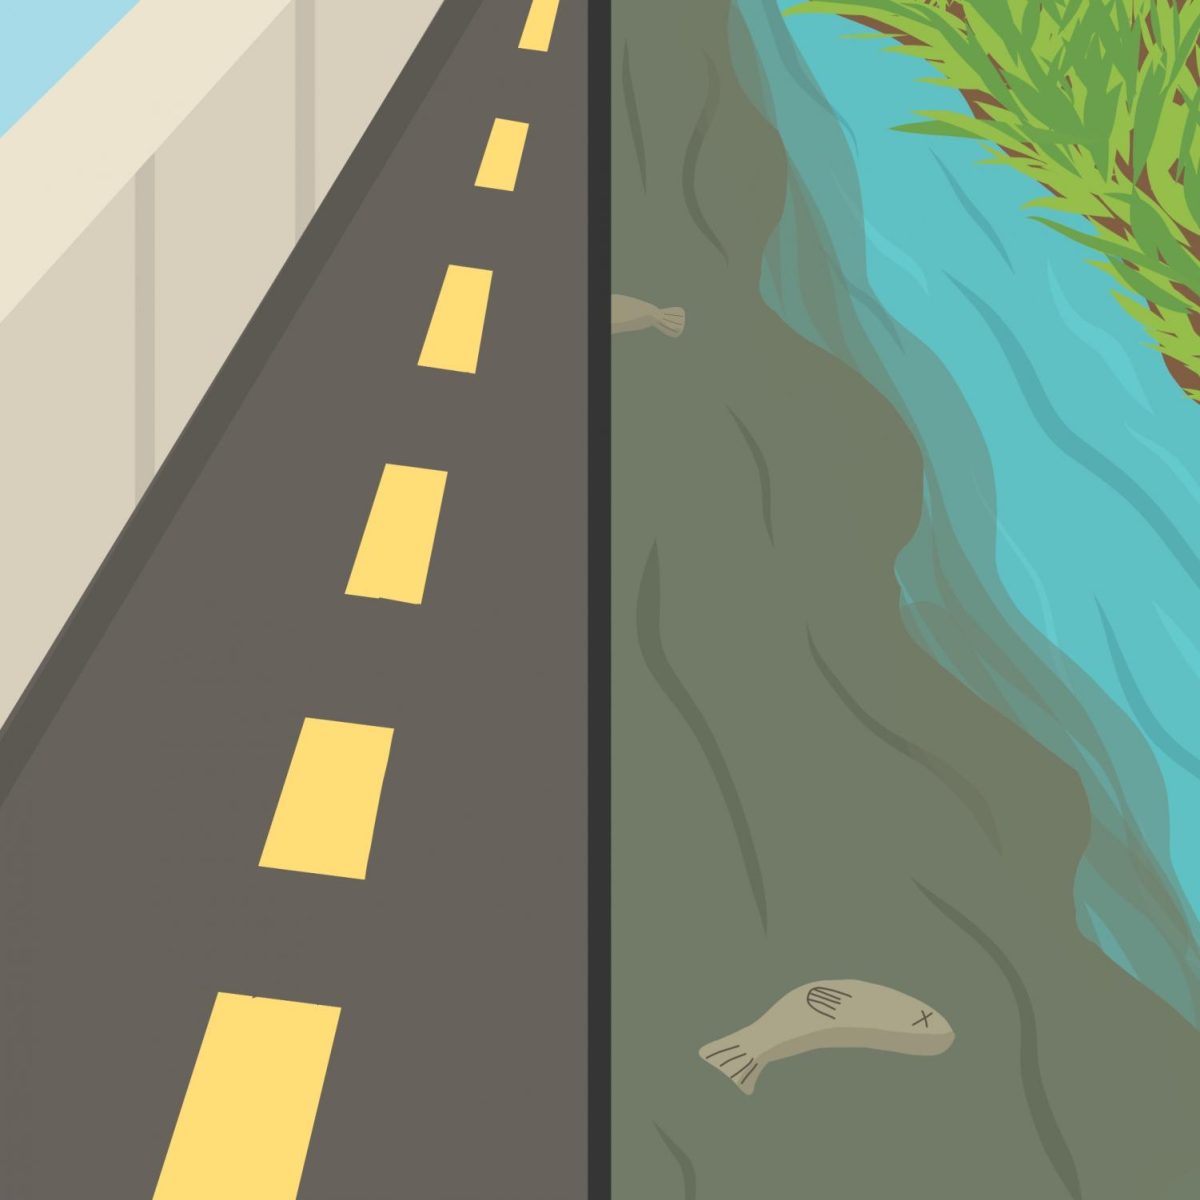 An illustration of a road and a murky river with dead fish separated by line down the middle.